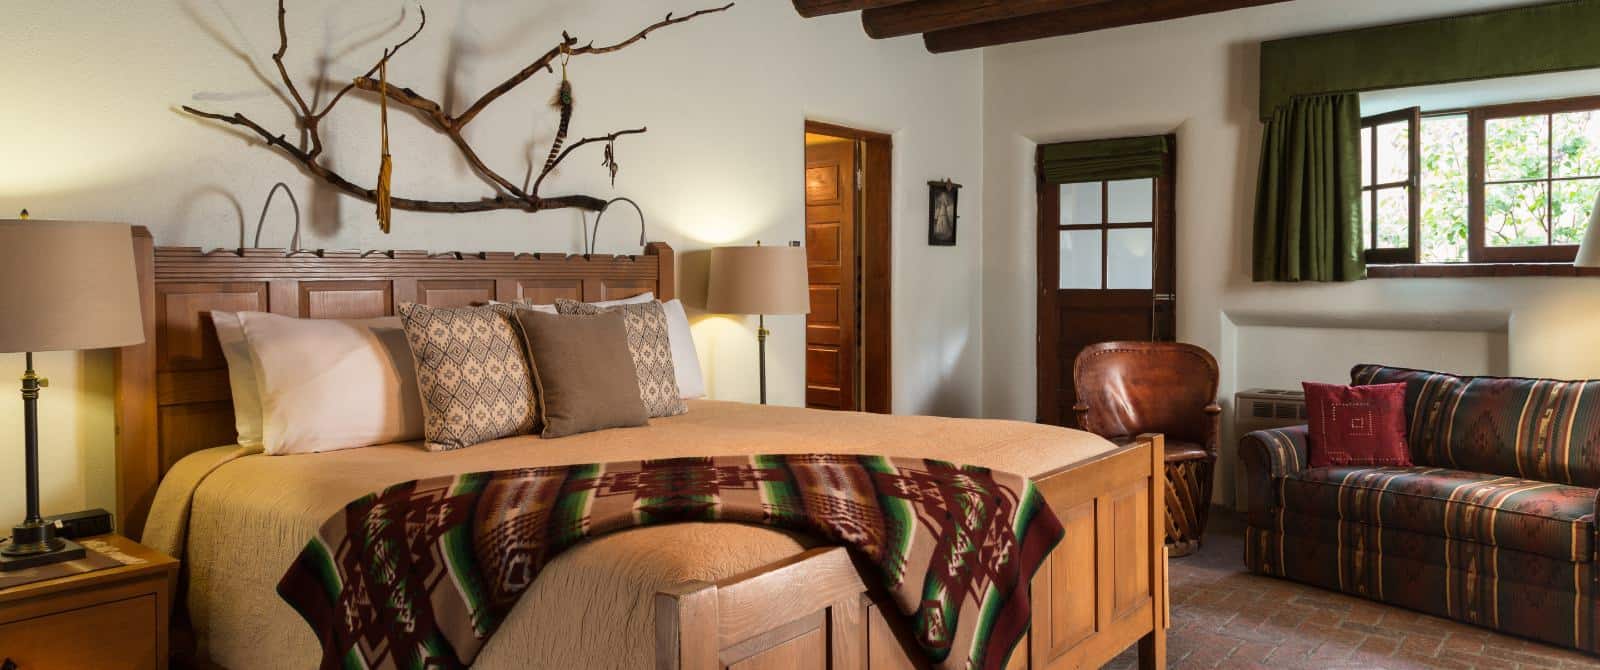 Pueblo-style bedroom with brick floor, bed made up in tan, sofa in southwest fabric, and unique wooden branch art piece.